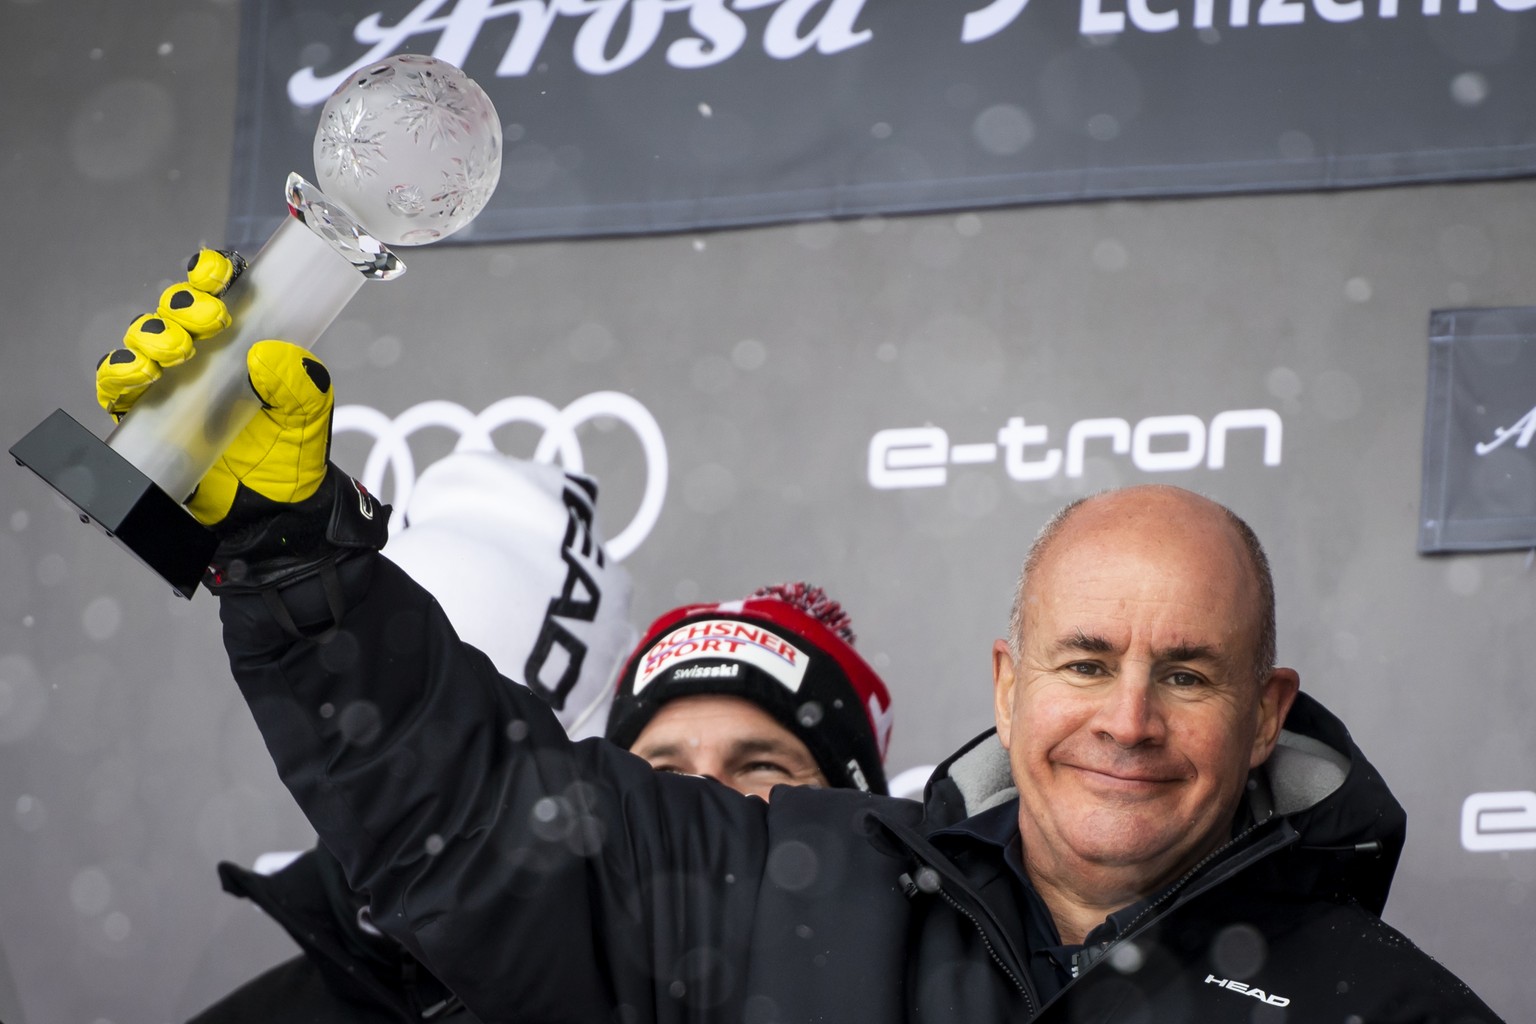 Johan Eliasch, Chairman of the Management Board of the HEAD group celebrates on the podium at the FIS Alpine Skiing World Cup finals, in Parpan-Lenzerheide, Switzerland, Sunday, March 21, 2021. (KEYST ...